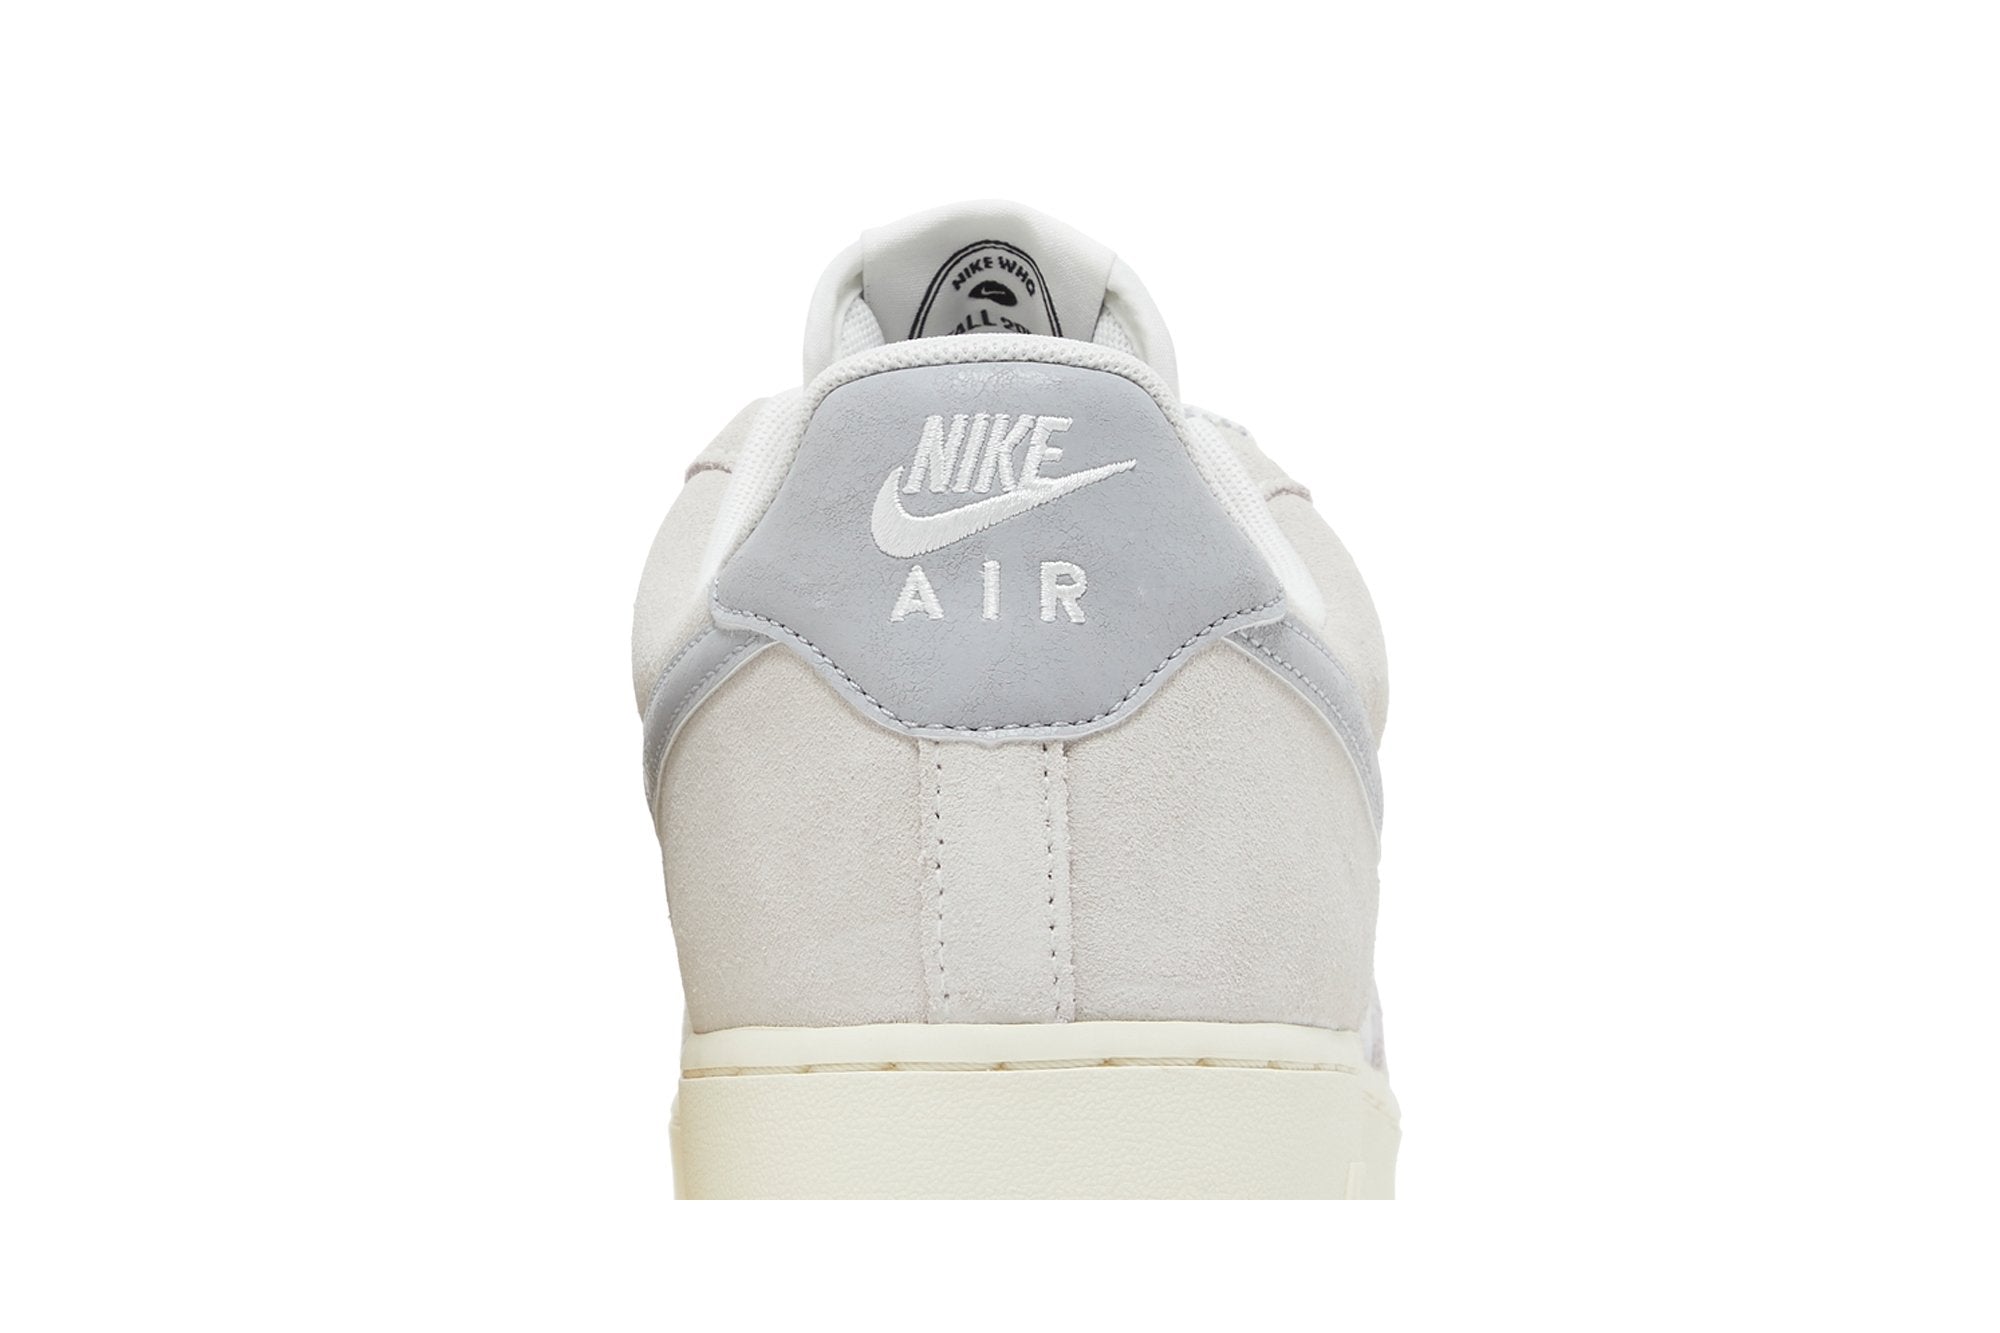 Nike Air Froce 1 Low '07 Vintage - Certified Fresh Photon Dust Sail ()